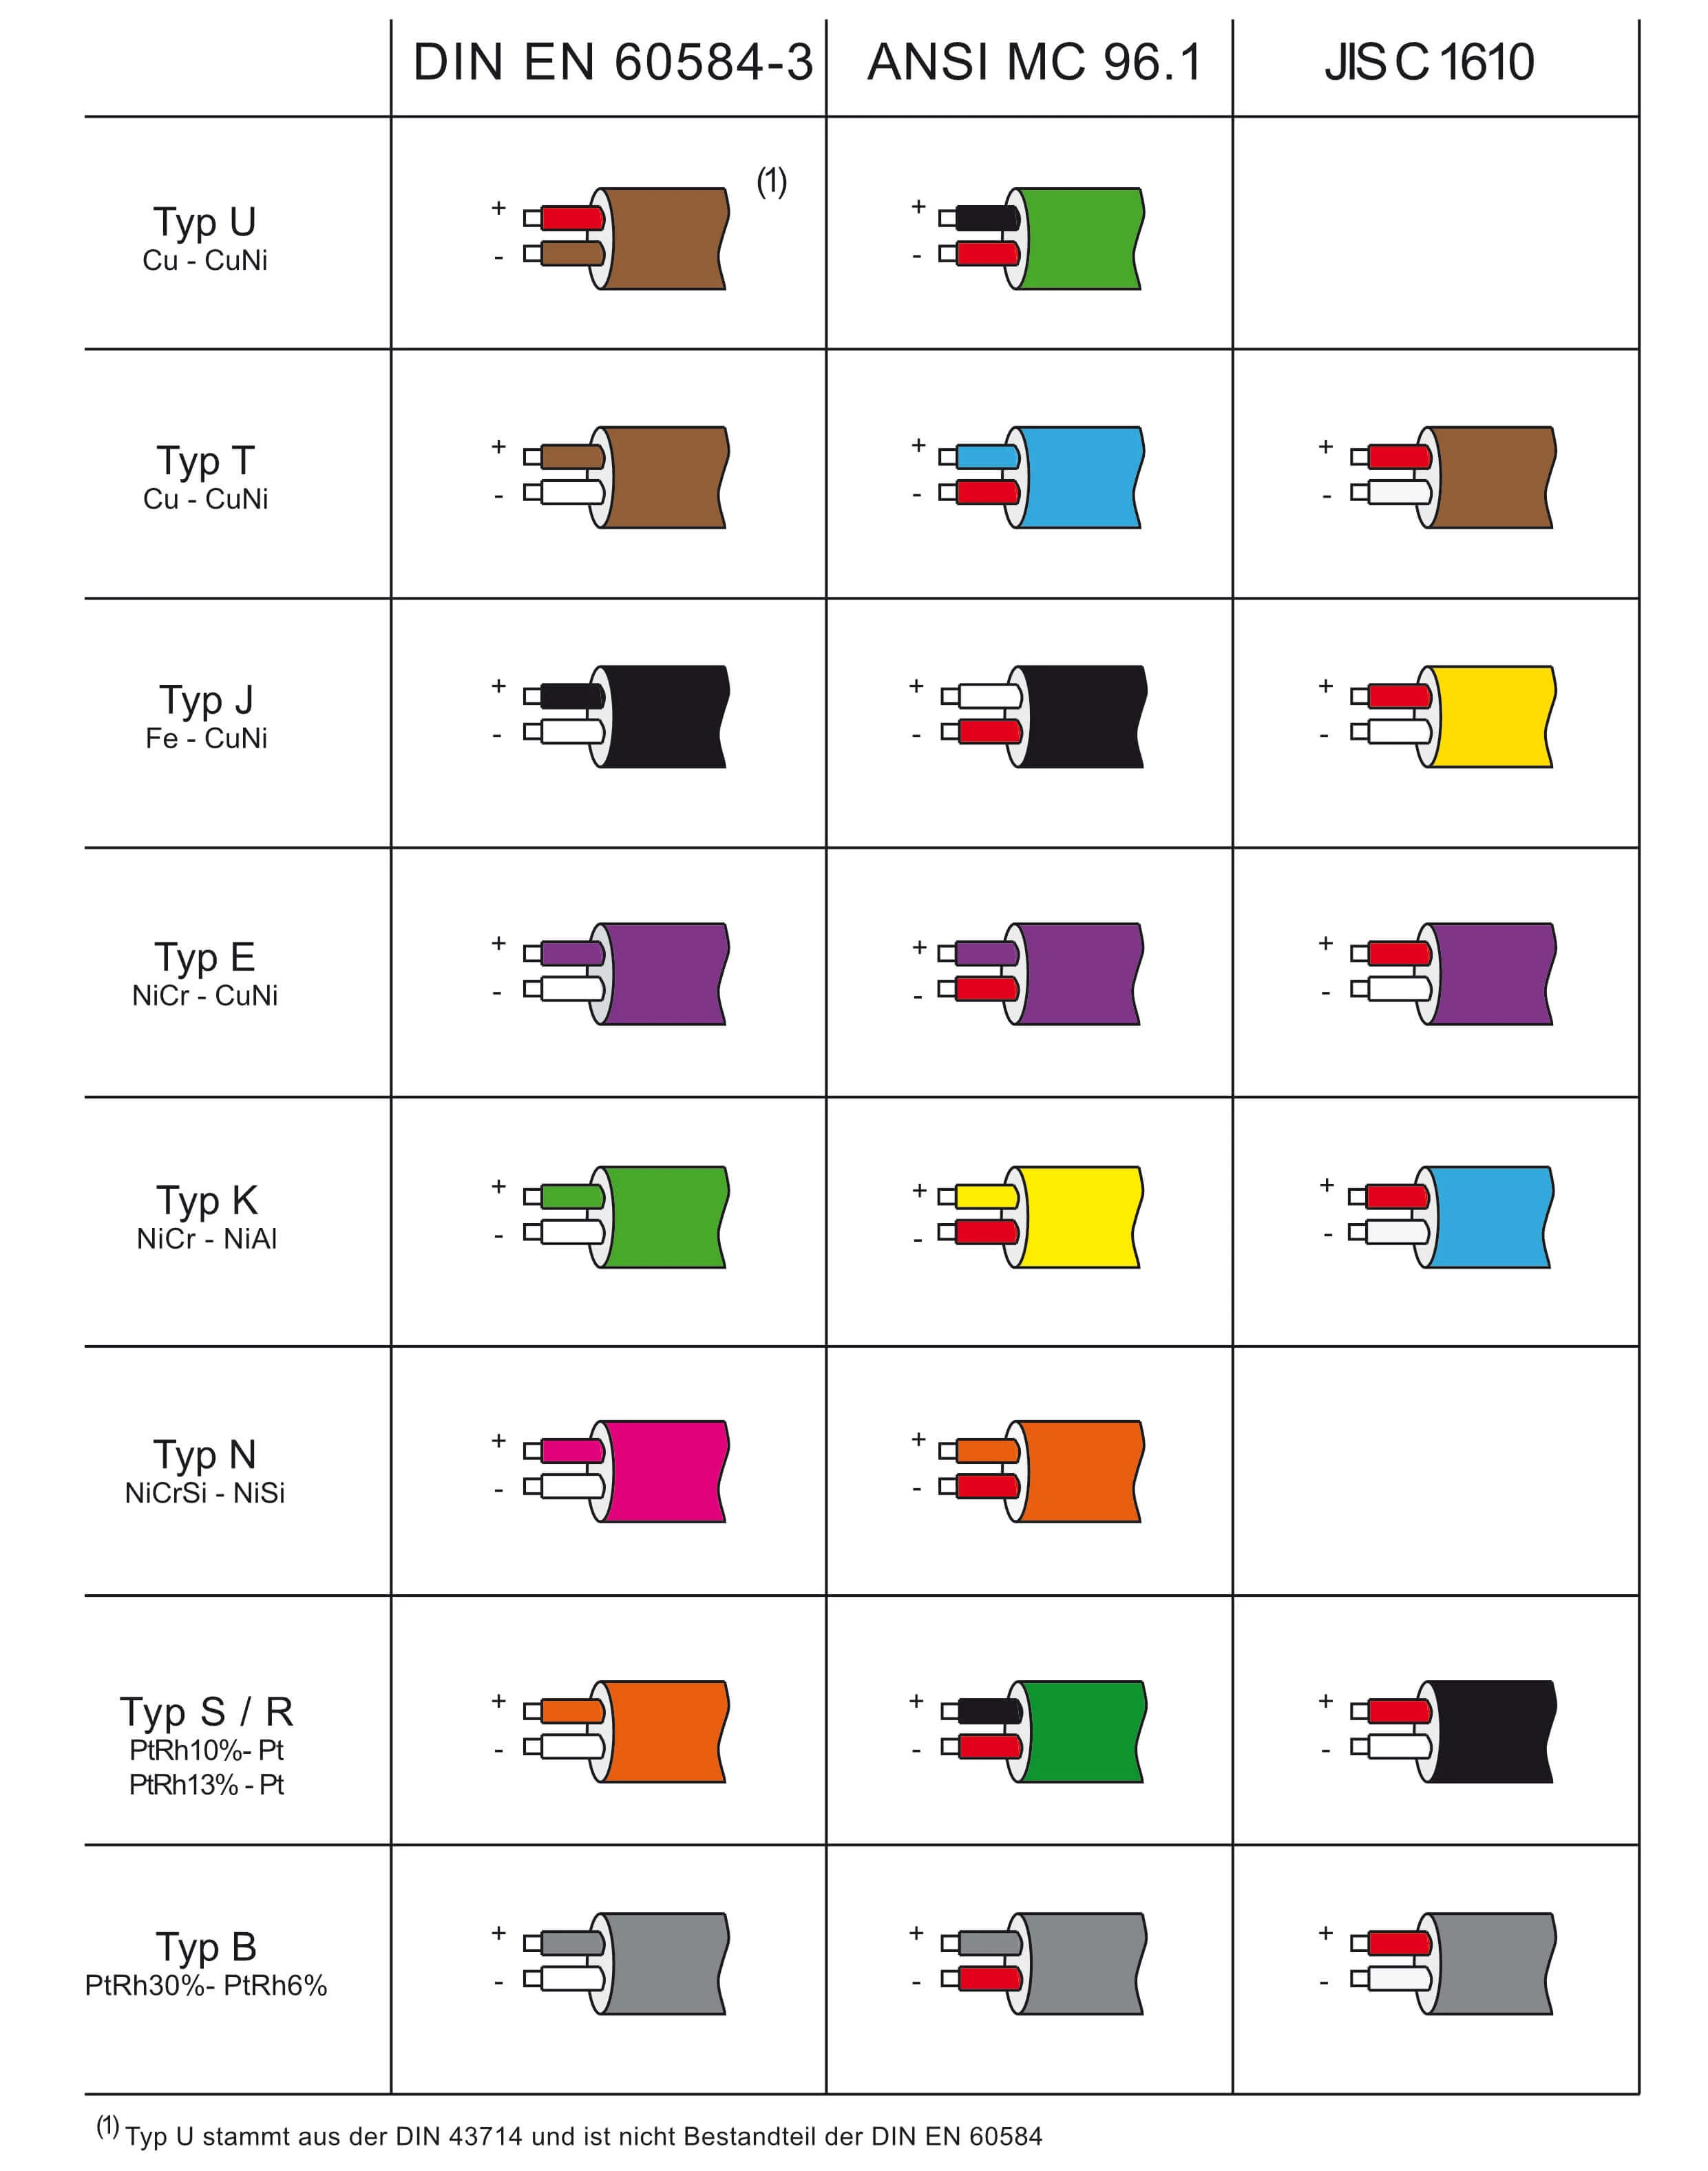 Color table for thermocouple types according to IEC, ANSI and JIS